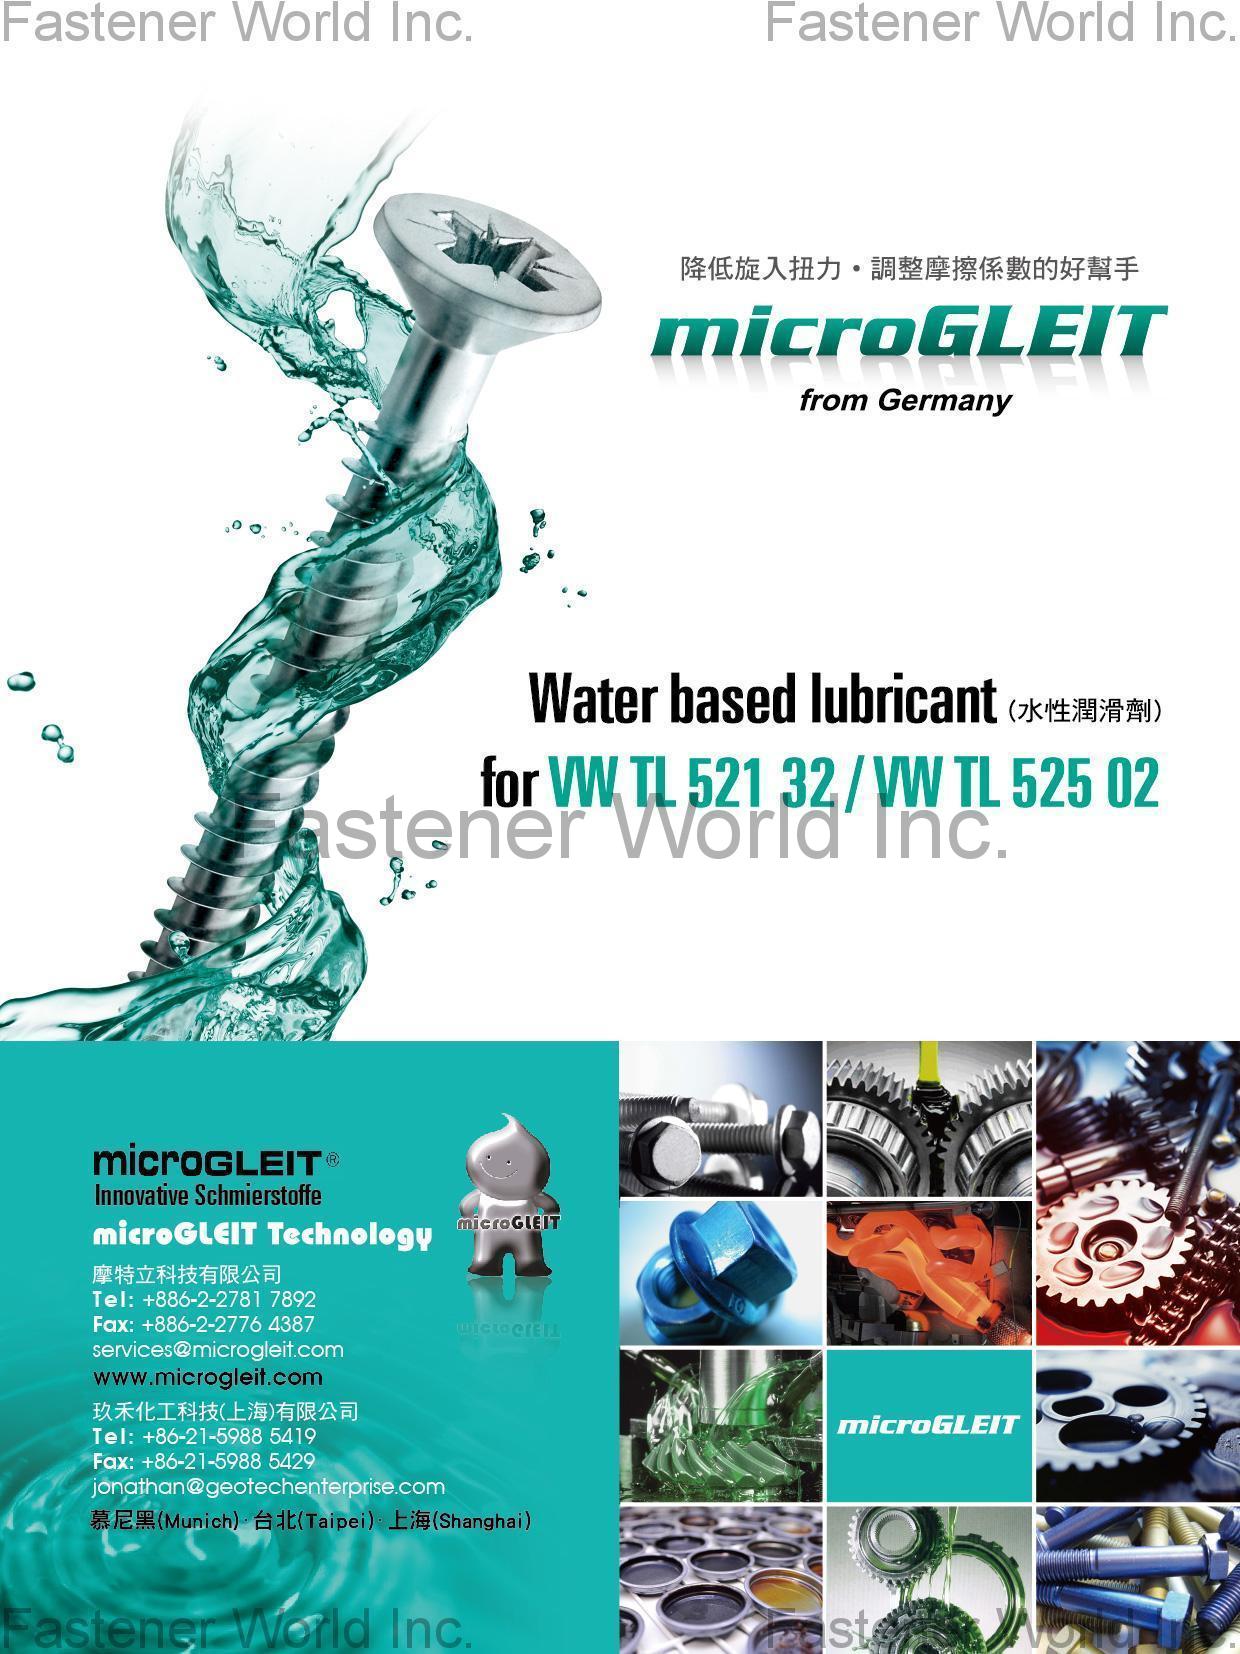 microGLEIT Technology Company  , Microgleit Lubricant, Aluminum Lubricant, Alkaline Dry Film Lubricant, Acidic Dry Film Lubricant, PTFE Lubricant, Rescue Lubricant at Assembly, Coefficient of Friction, MoS2, Aluminum bolt, TAIWAN , Lubricant